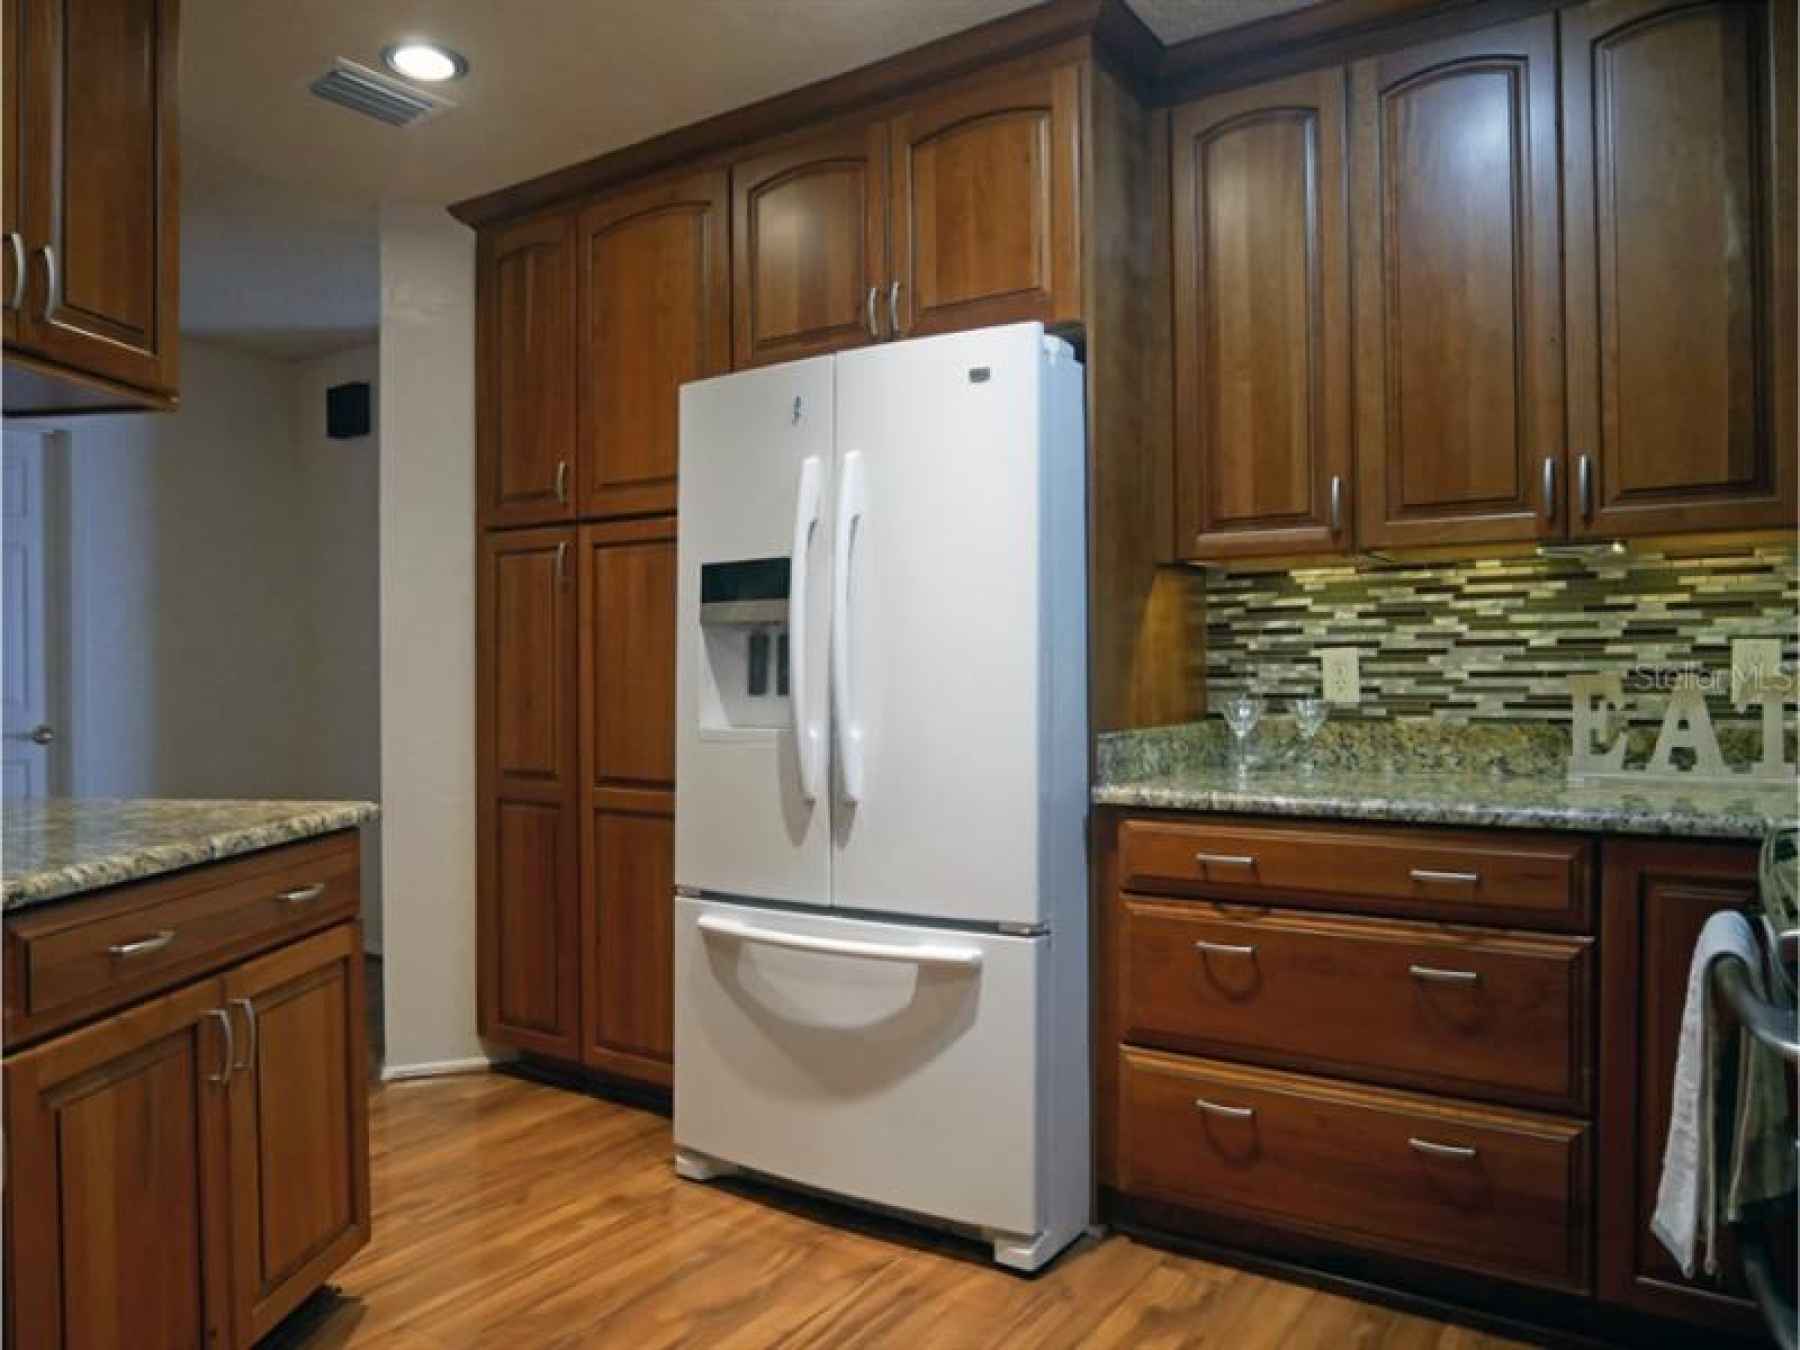 Ample amount of cabinetry, pantry on the left side of refrigerator with pull outs